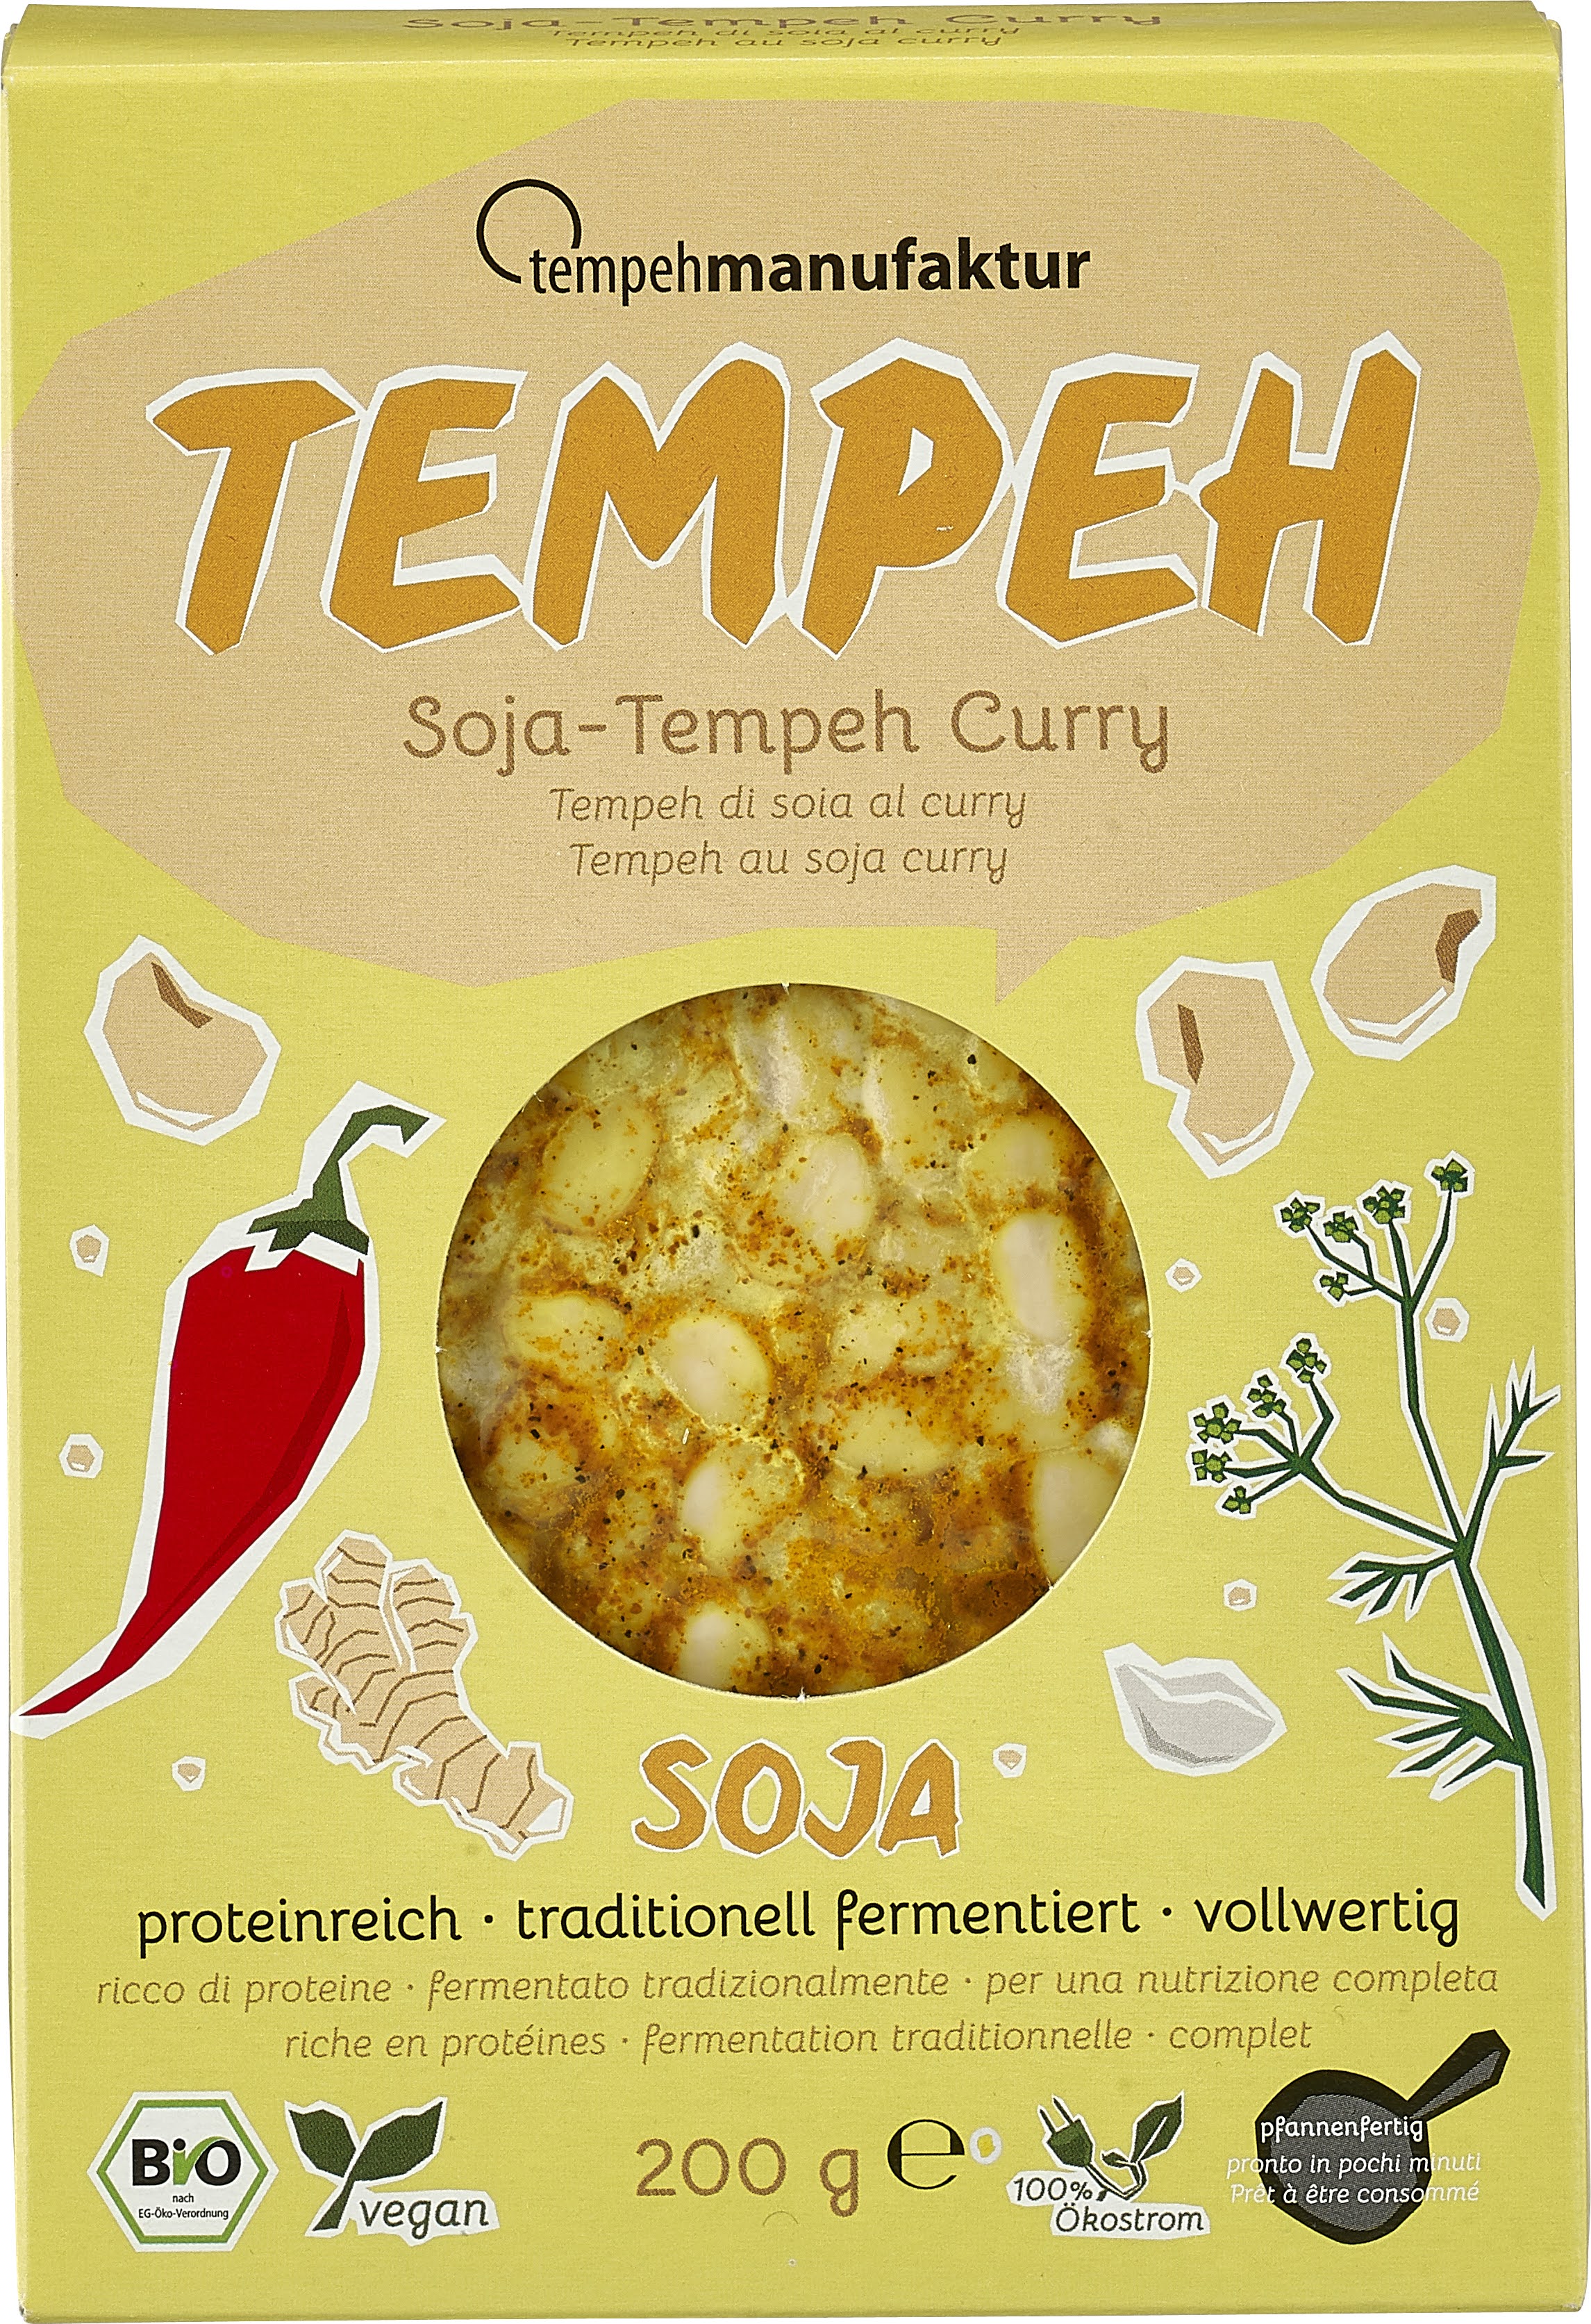 Tempeh Curry